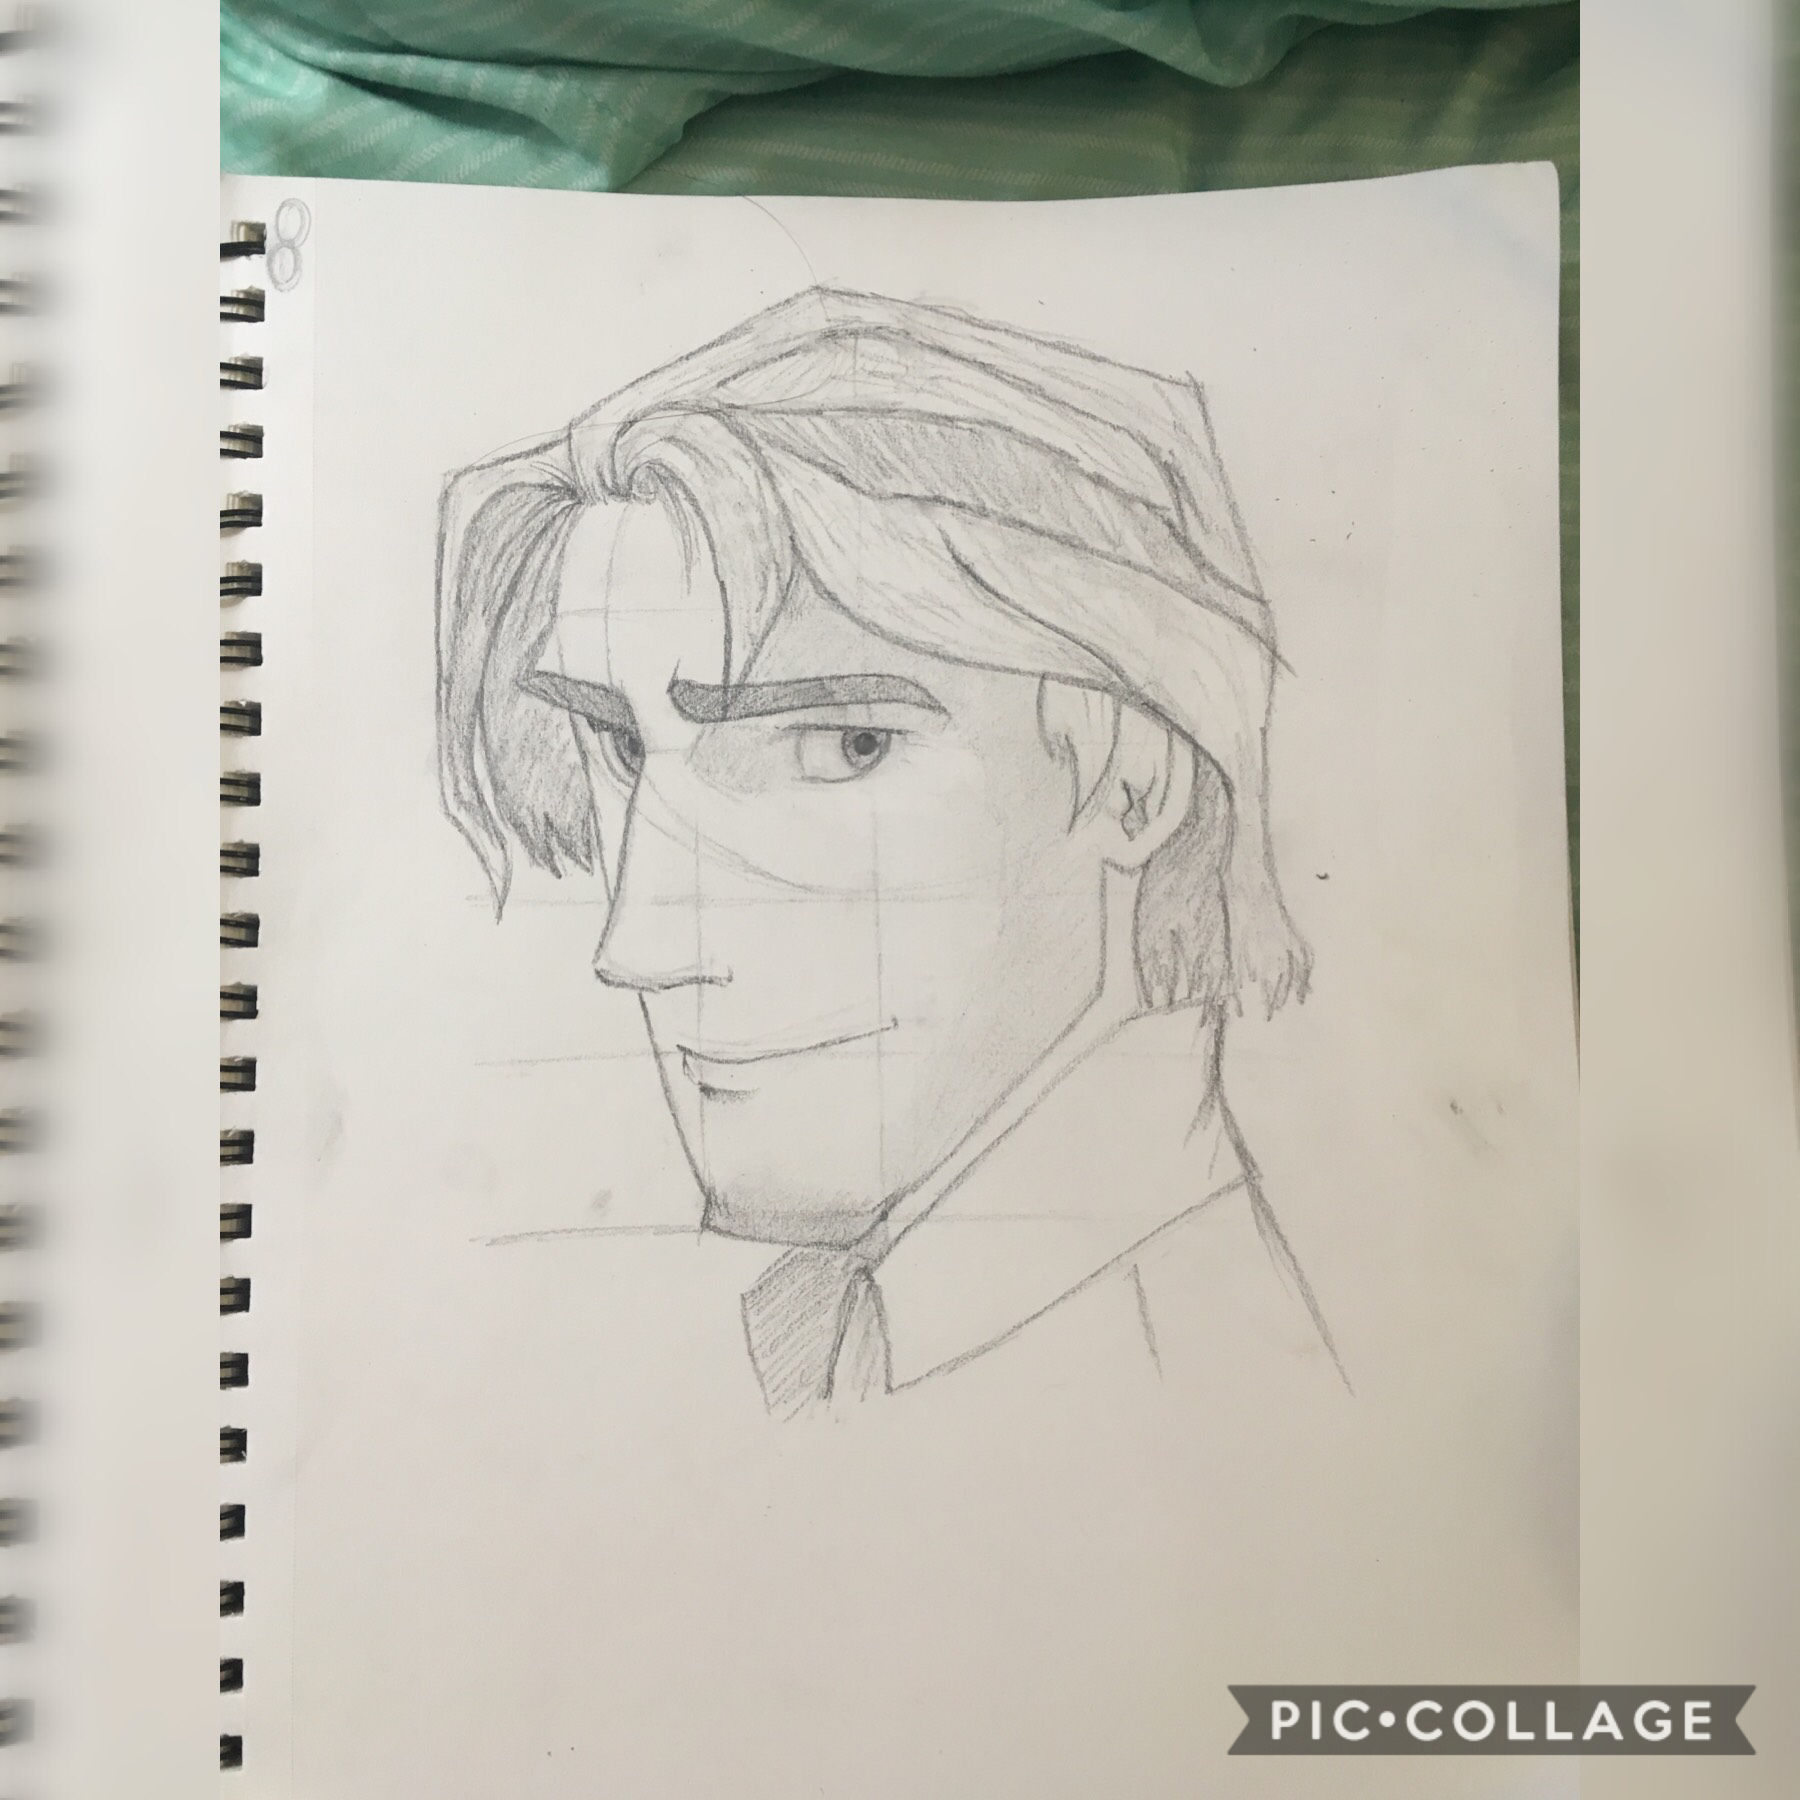 I drew my bf Flynn Ryder/Eugene Fitzherbert. i followed a tutorial from a guy that works at Hollywood studios haha. I sketched out the guidelines more vertically than the guy did so the eyes are too small but whatever